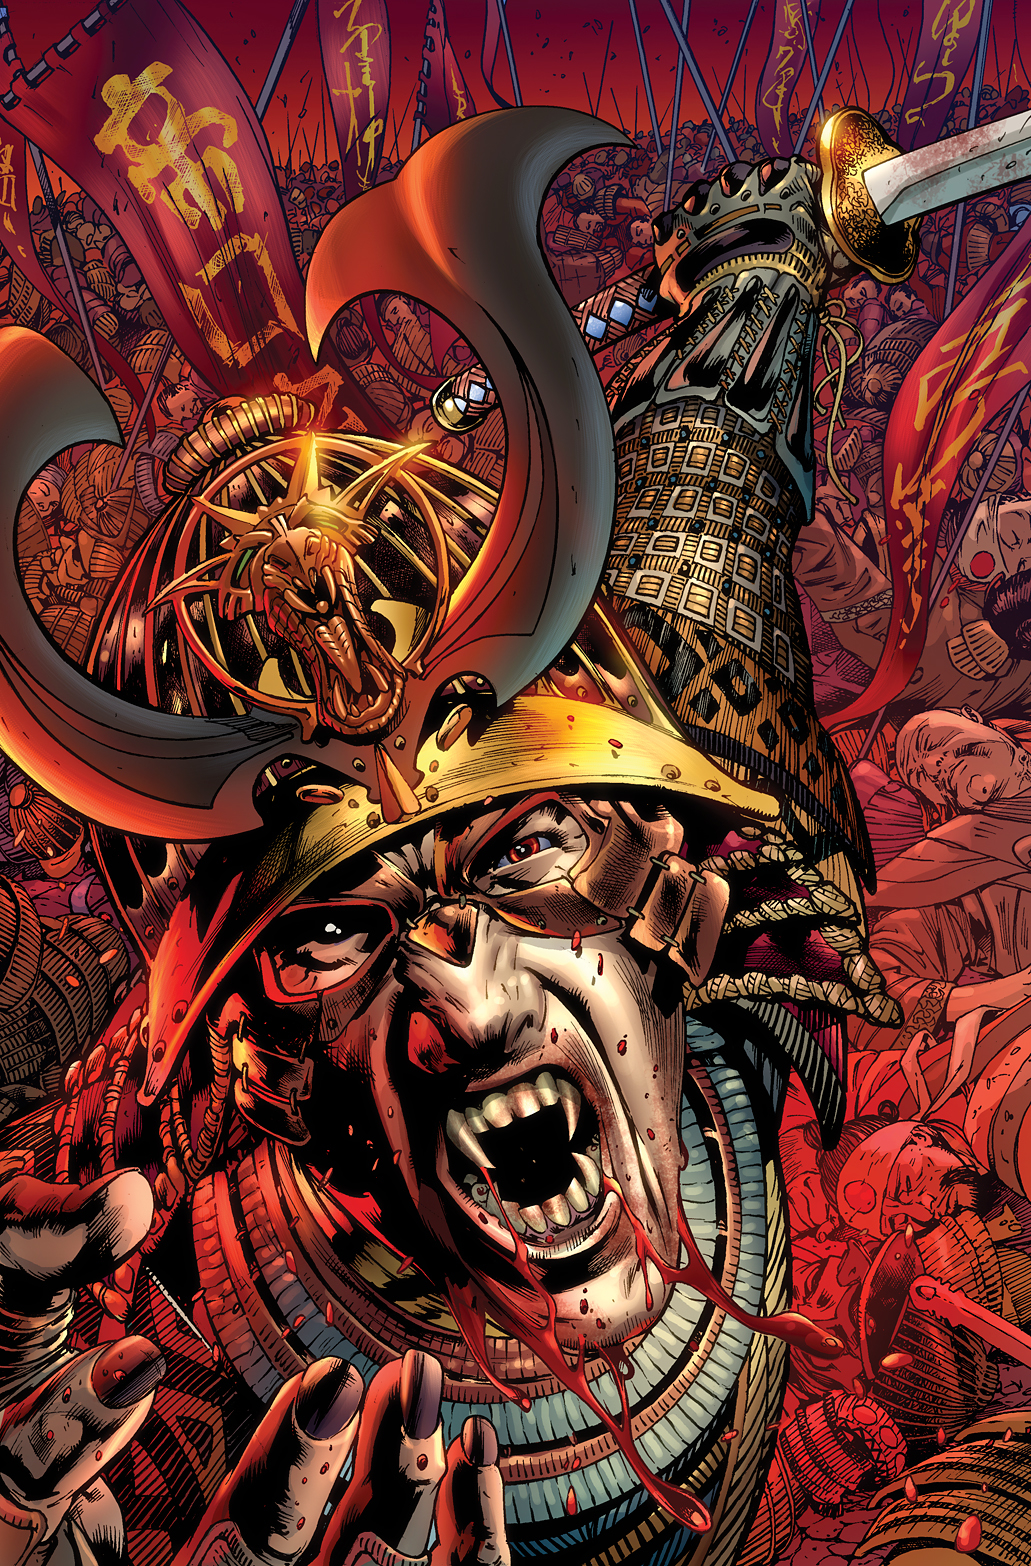 TOMB OF DRACULA PRESENTS THRONE OF BLOOD #1